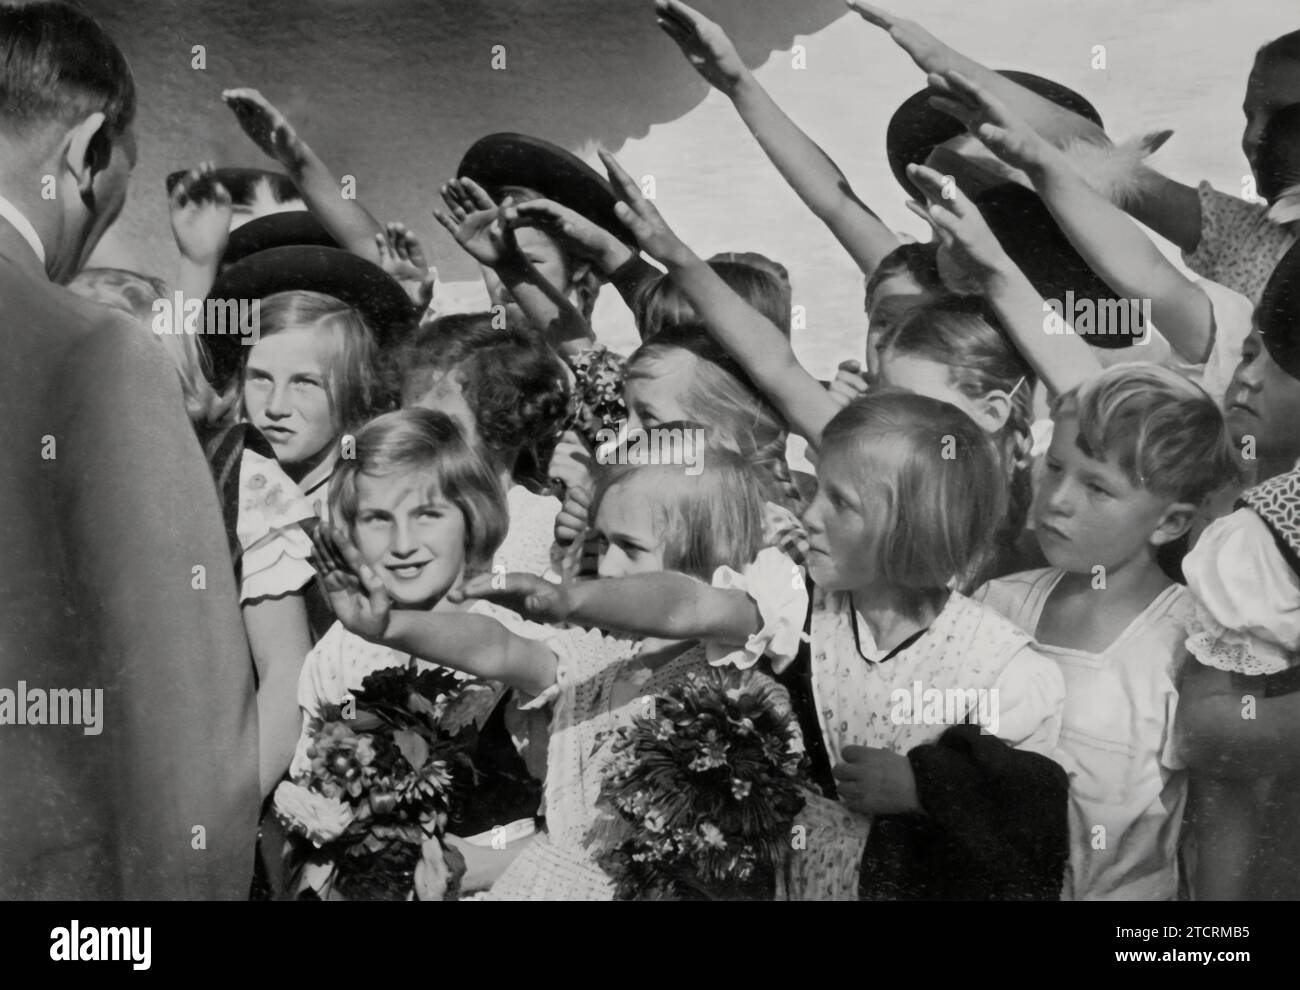 In 'Kinderhände' (Children's Hands), Adolf Hitler is seen greeting children and receiving flowers from them. This image is a poignant example of how the Nazi regime used orchestrated interactions with youth to cultivate a public image of benevolence and approachability. The act of accepting flowers from children was a common propaganda tool, aimed at softening Hitler's image and promoting the idea of a nurturing, paternal leader, deeply connected with the younger generation. Stock Photo